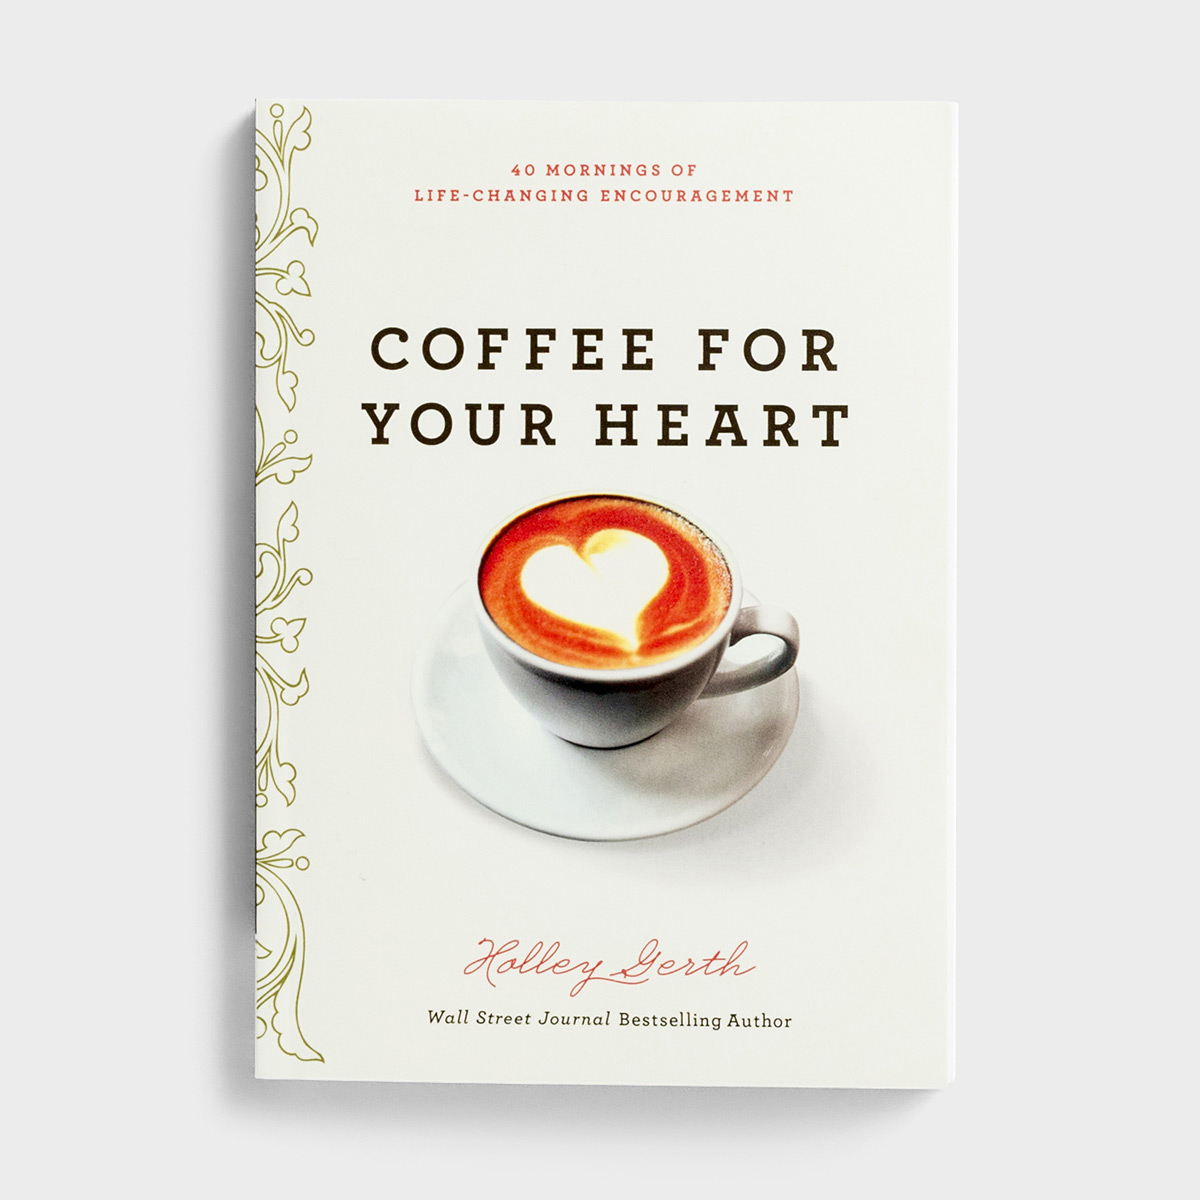 Holley Gerth - Coffee For Your Heart: 40 Mornings of Life-Changing Encouragement